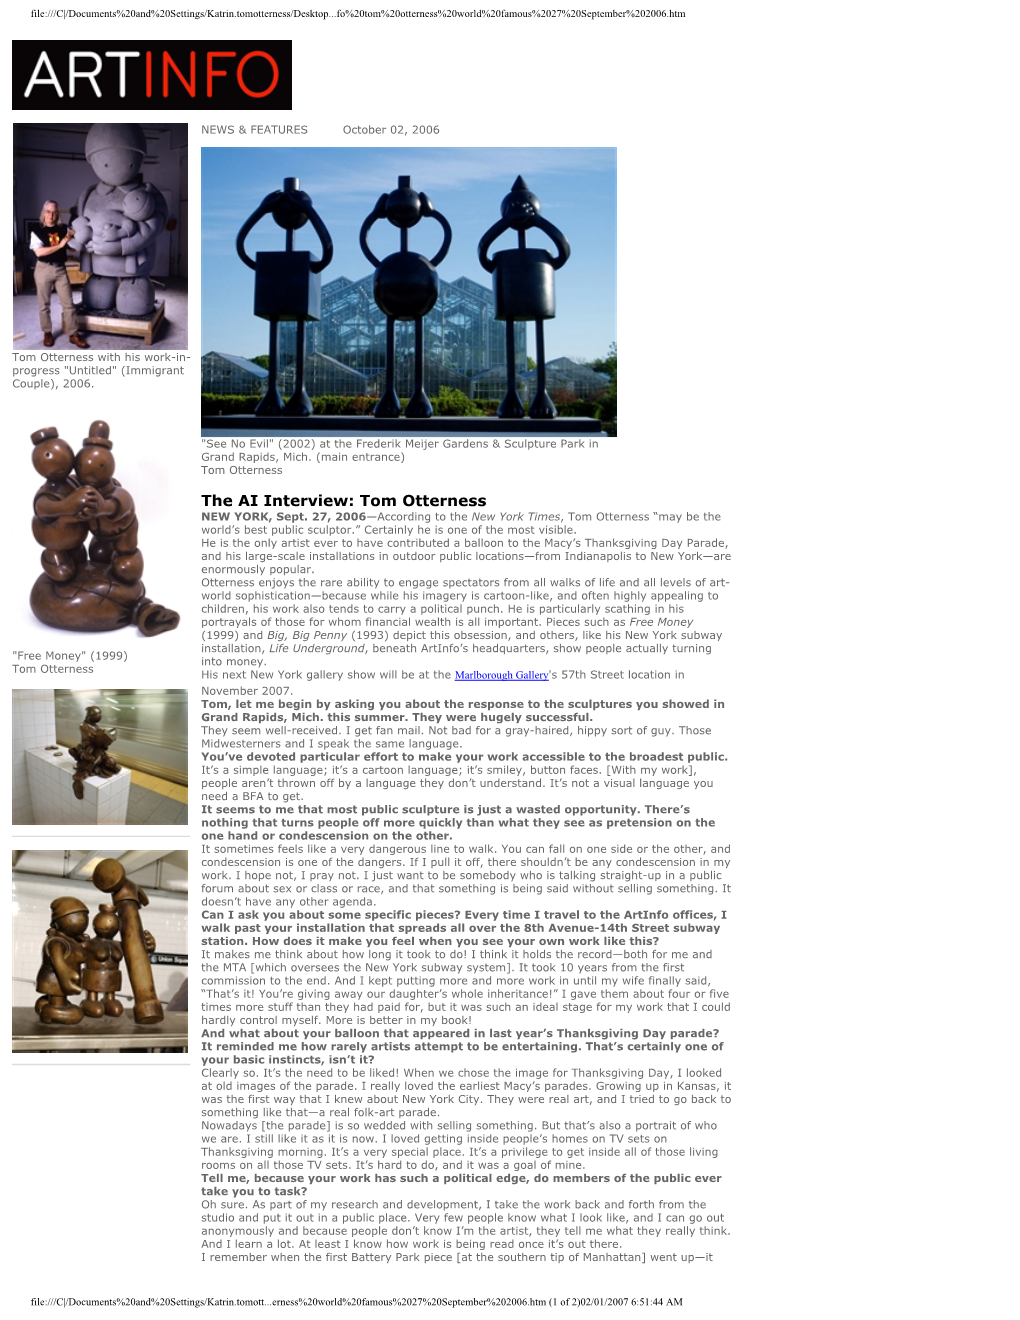 The AI Interview: Tom Otterness NEW YORK, Sept